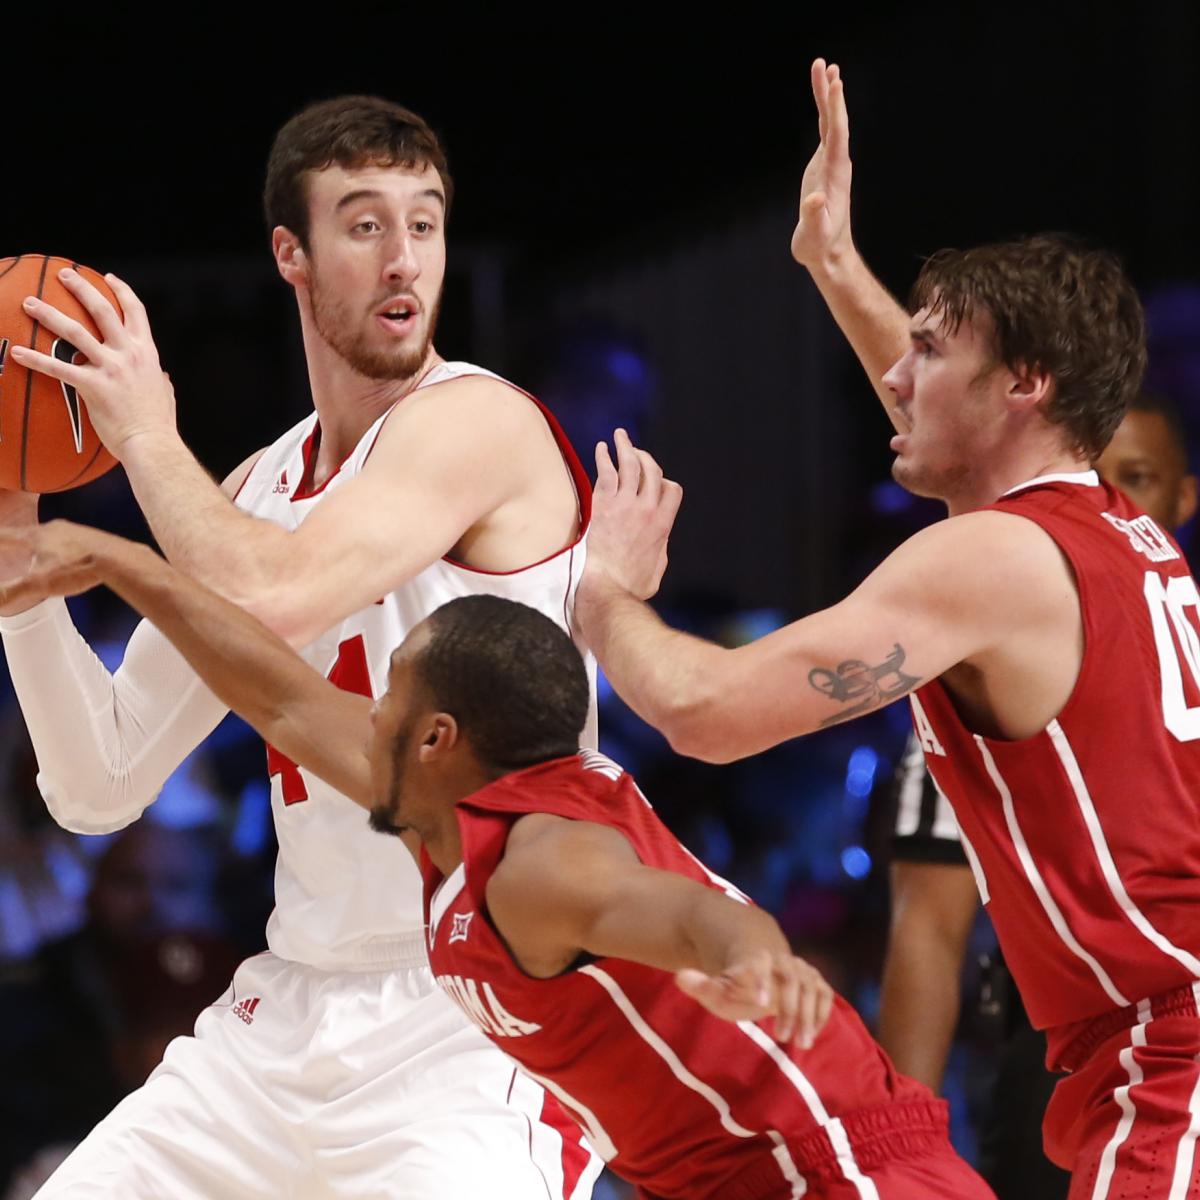 Wisconsin vs. Oklahoma Live Score and Highlights from Battle for